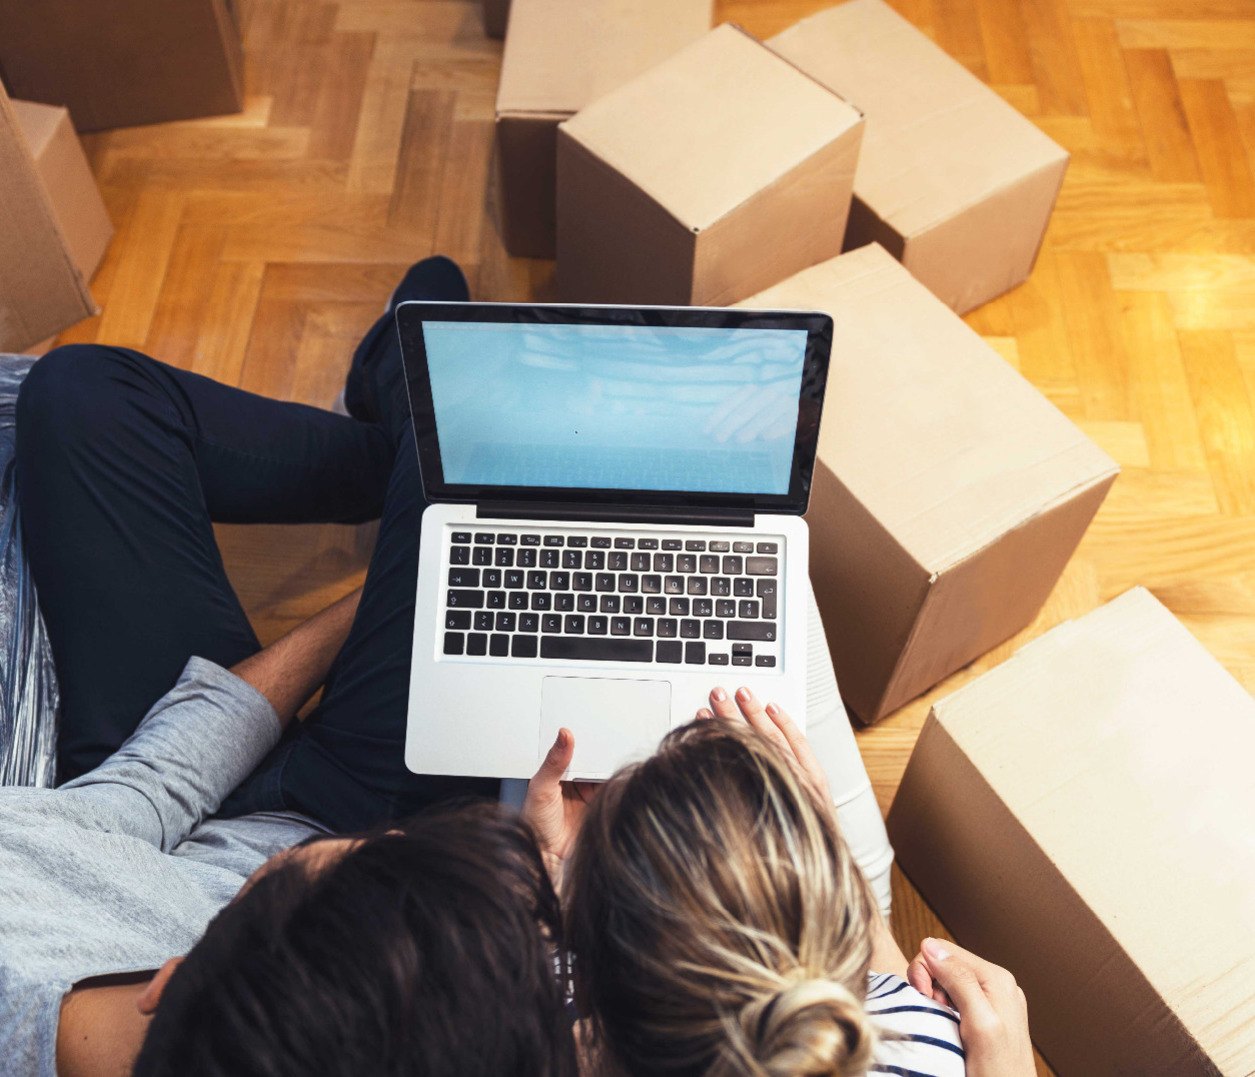 We'll get you packed before you know it, with our professional Bristol removals team.